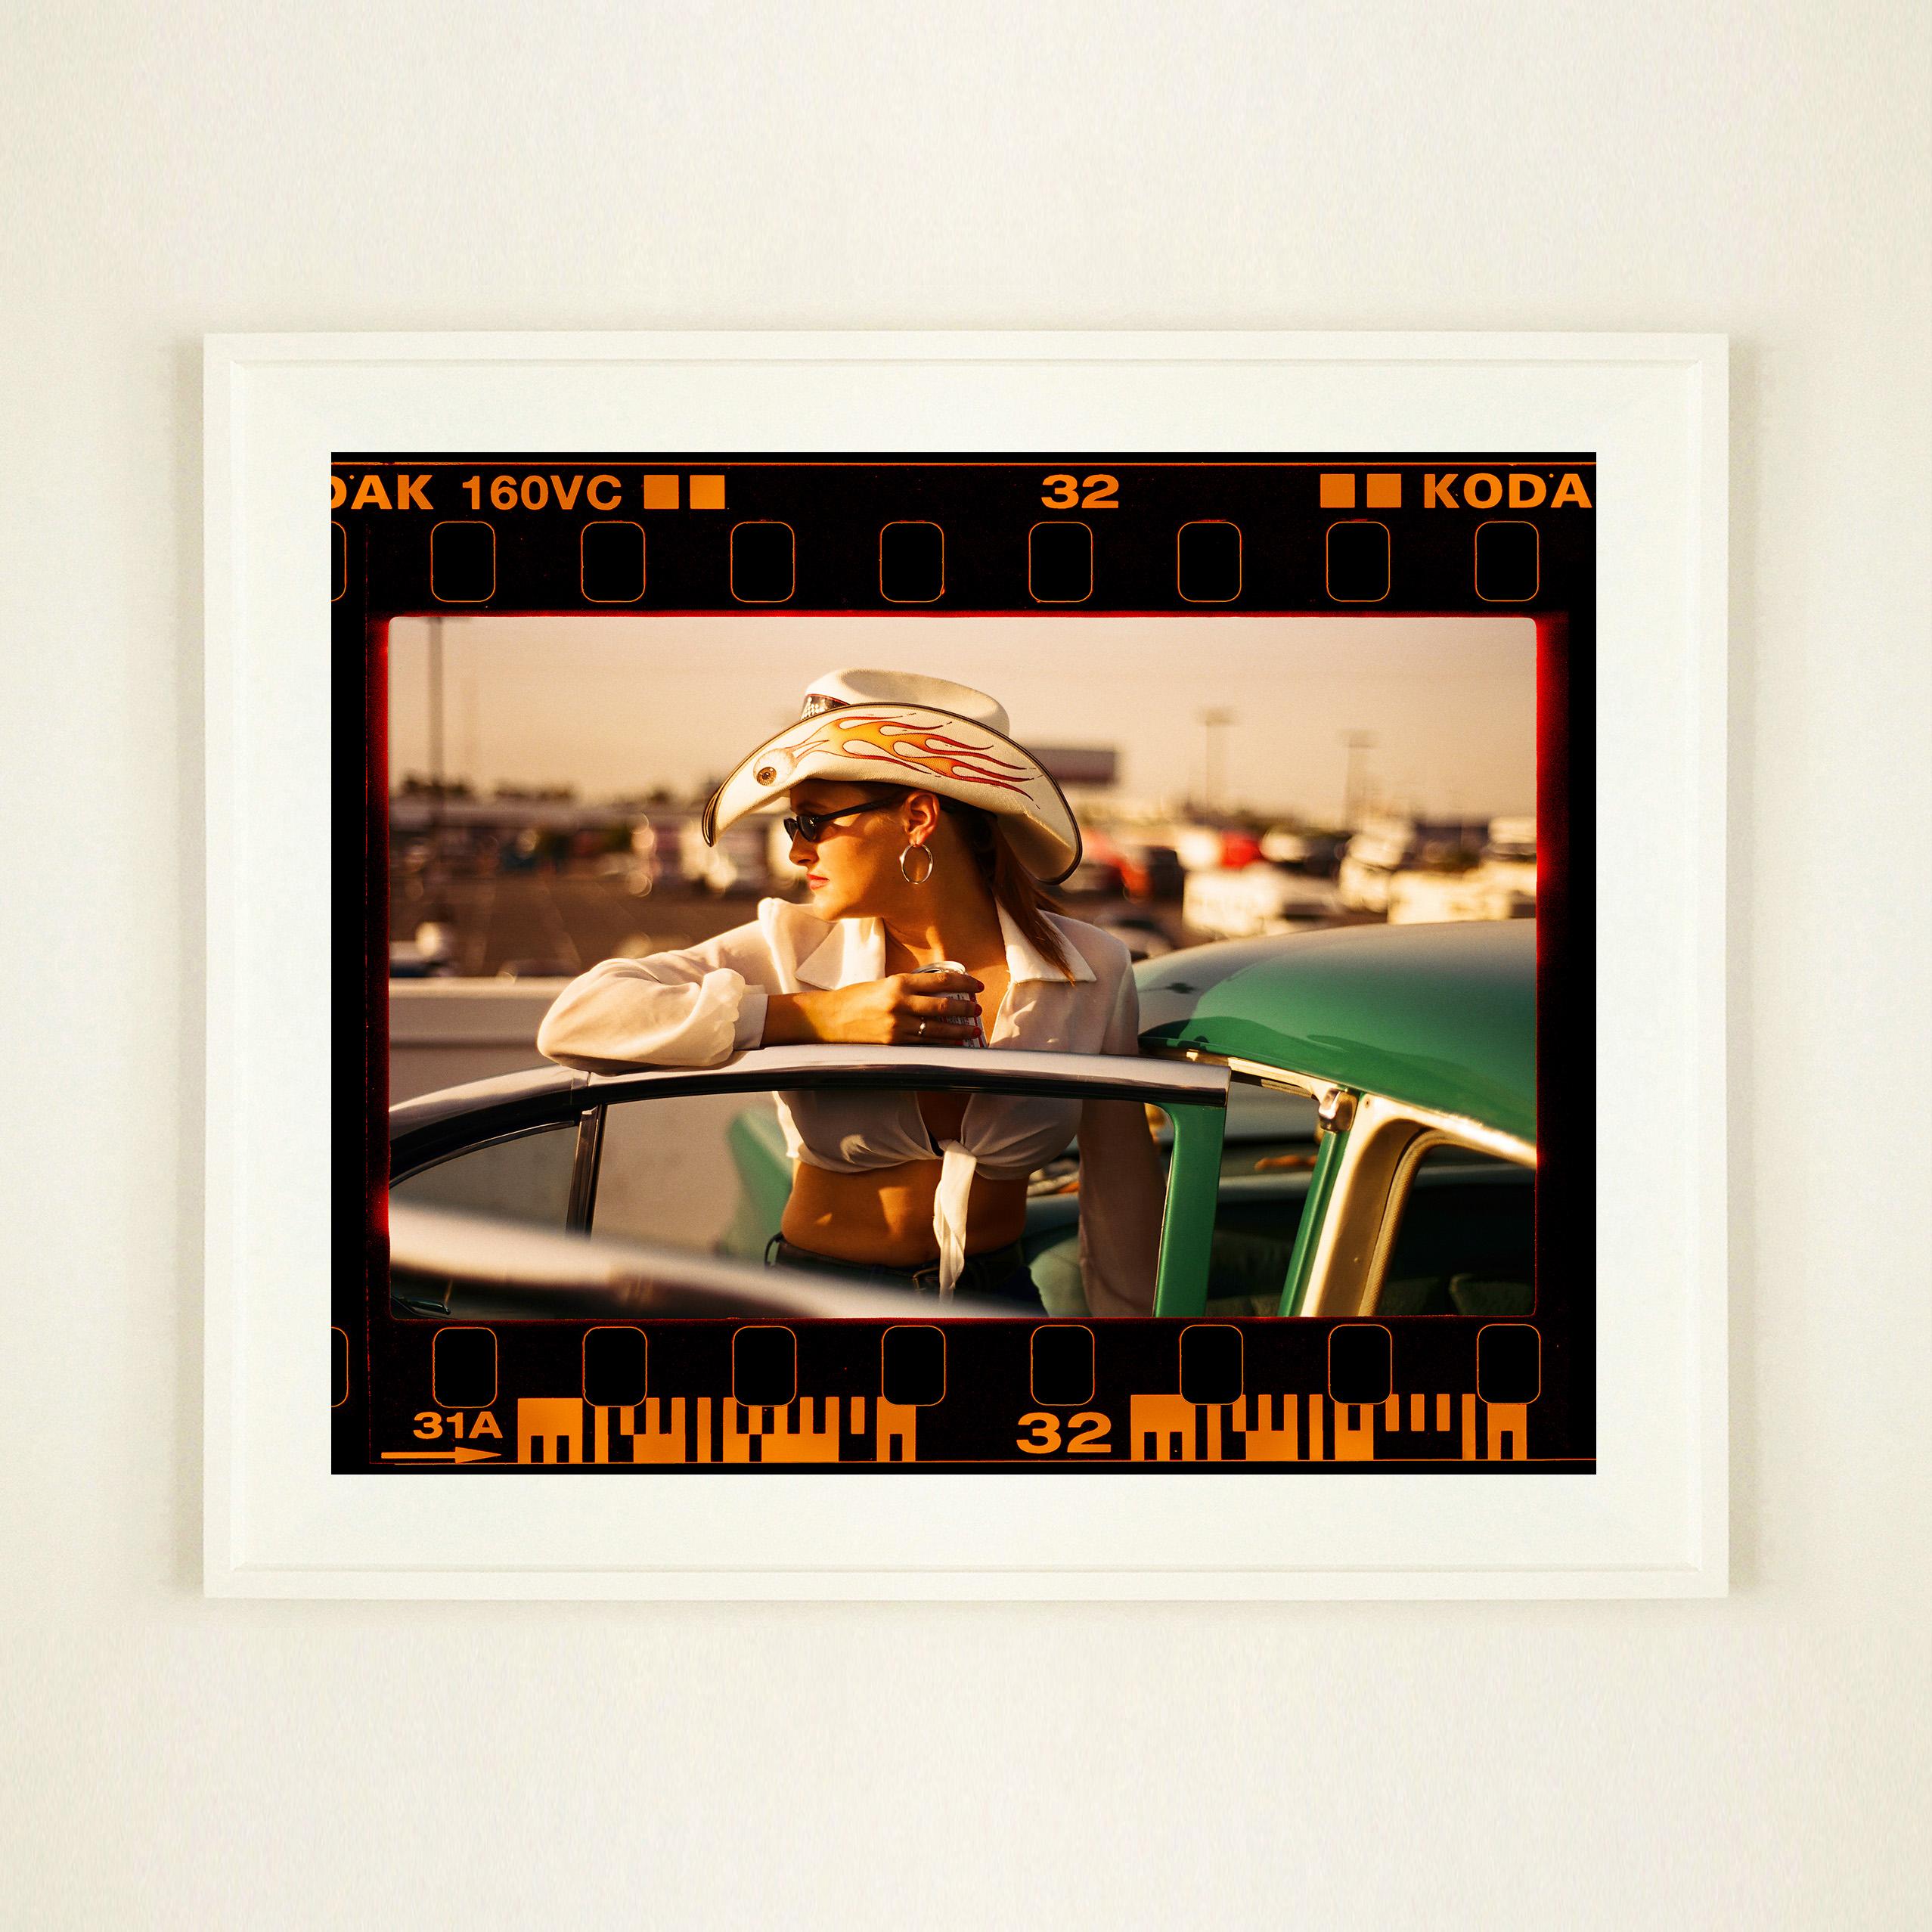 On the Road, reimagines classic Richard Heeps artworks presented with full film rebate almost like a blown up contact sheet. 
'Sun Kissed Wendy', from Richard Heeps' 'Man's Ruin' Series. This artwork is part of a sequence capturing Wendy at the